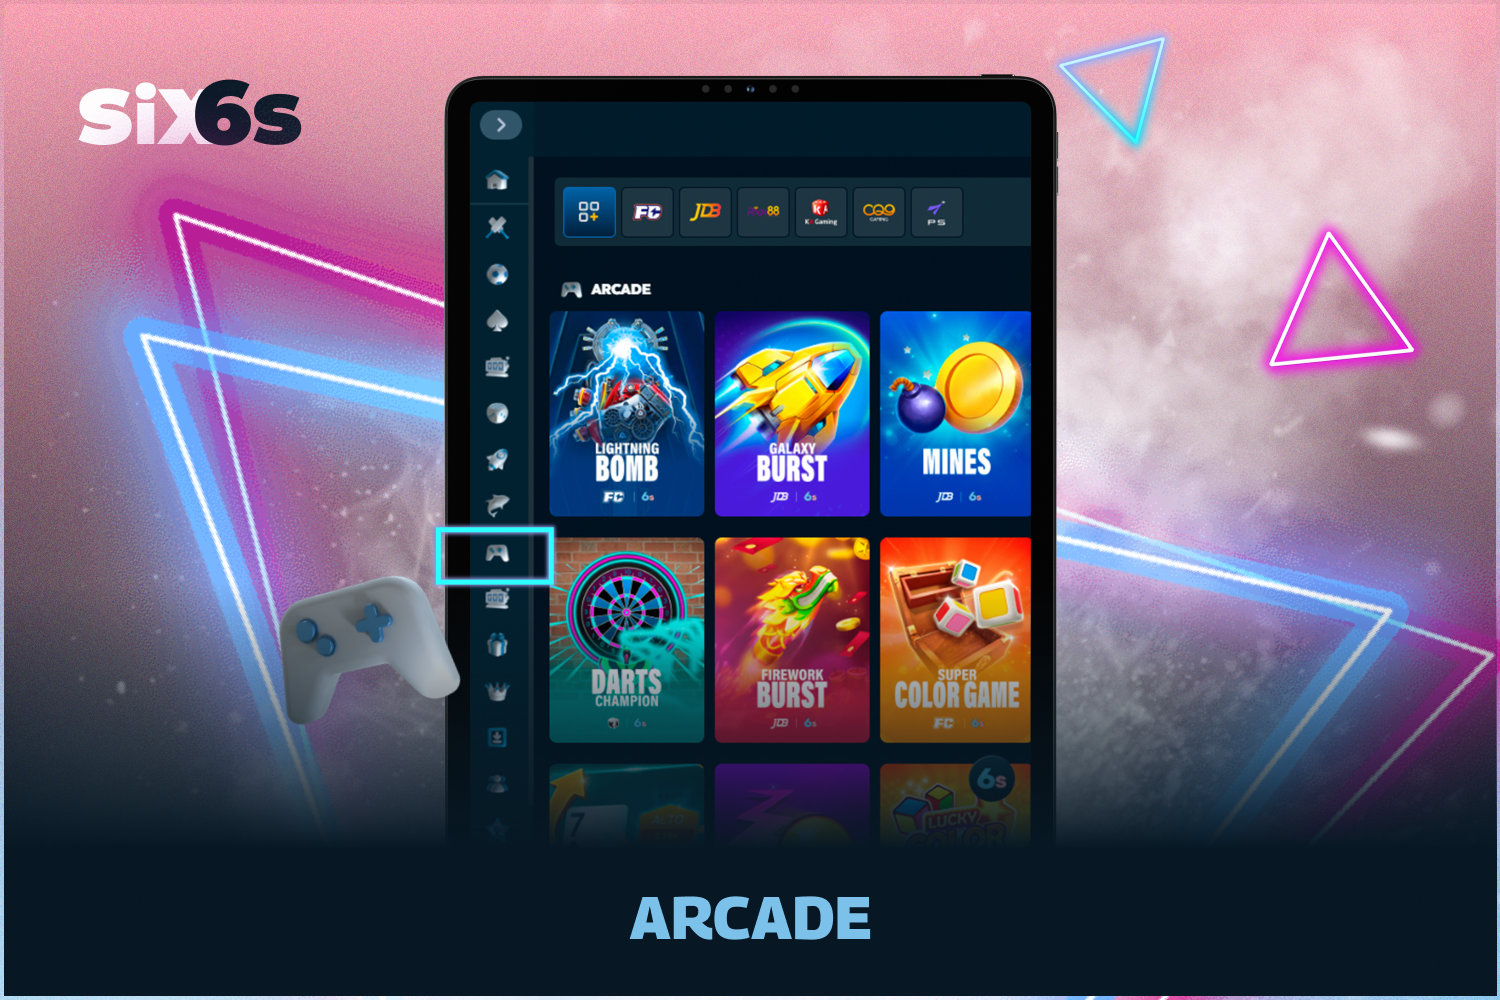 Arcade is section of Six6s casino games that tend to have very simple gameplay, and the deciding factor for success is more often than not luck